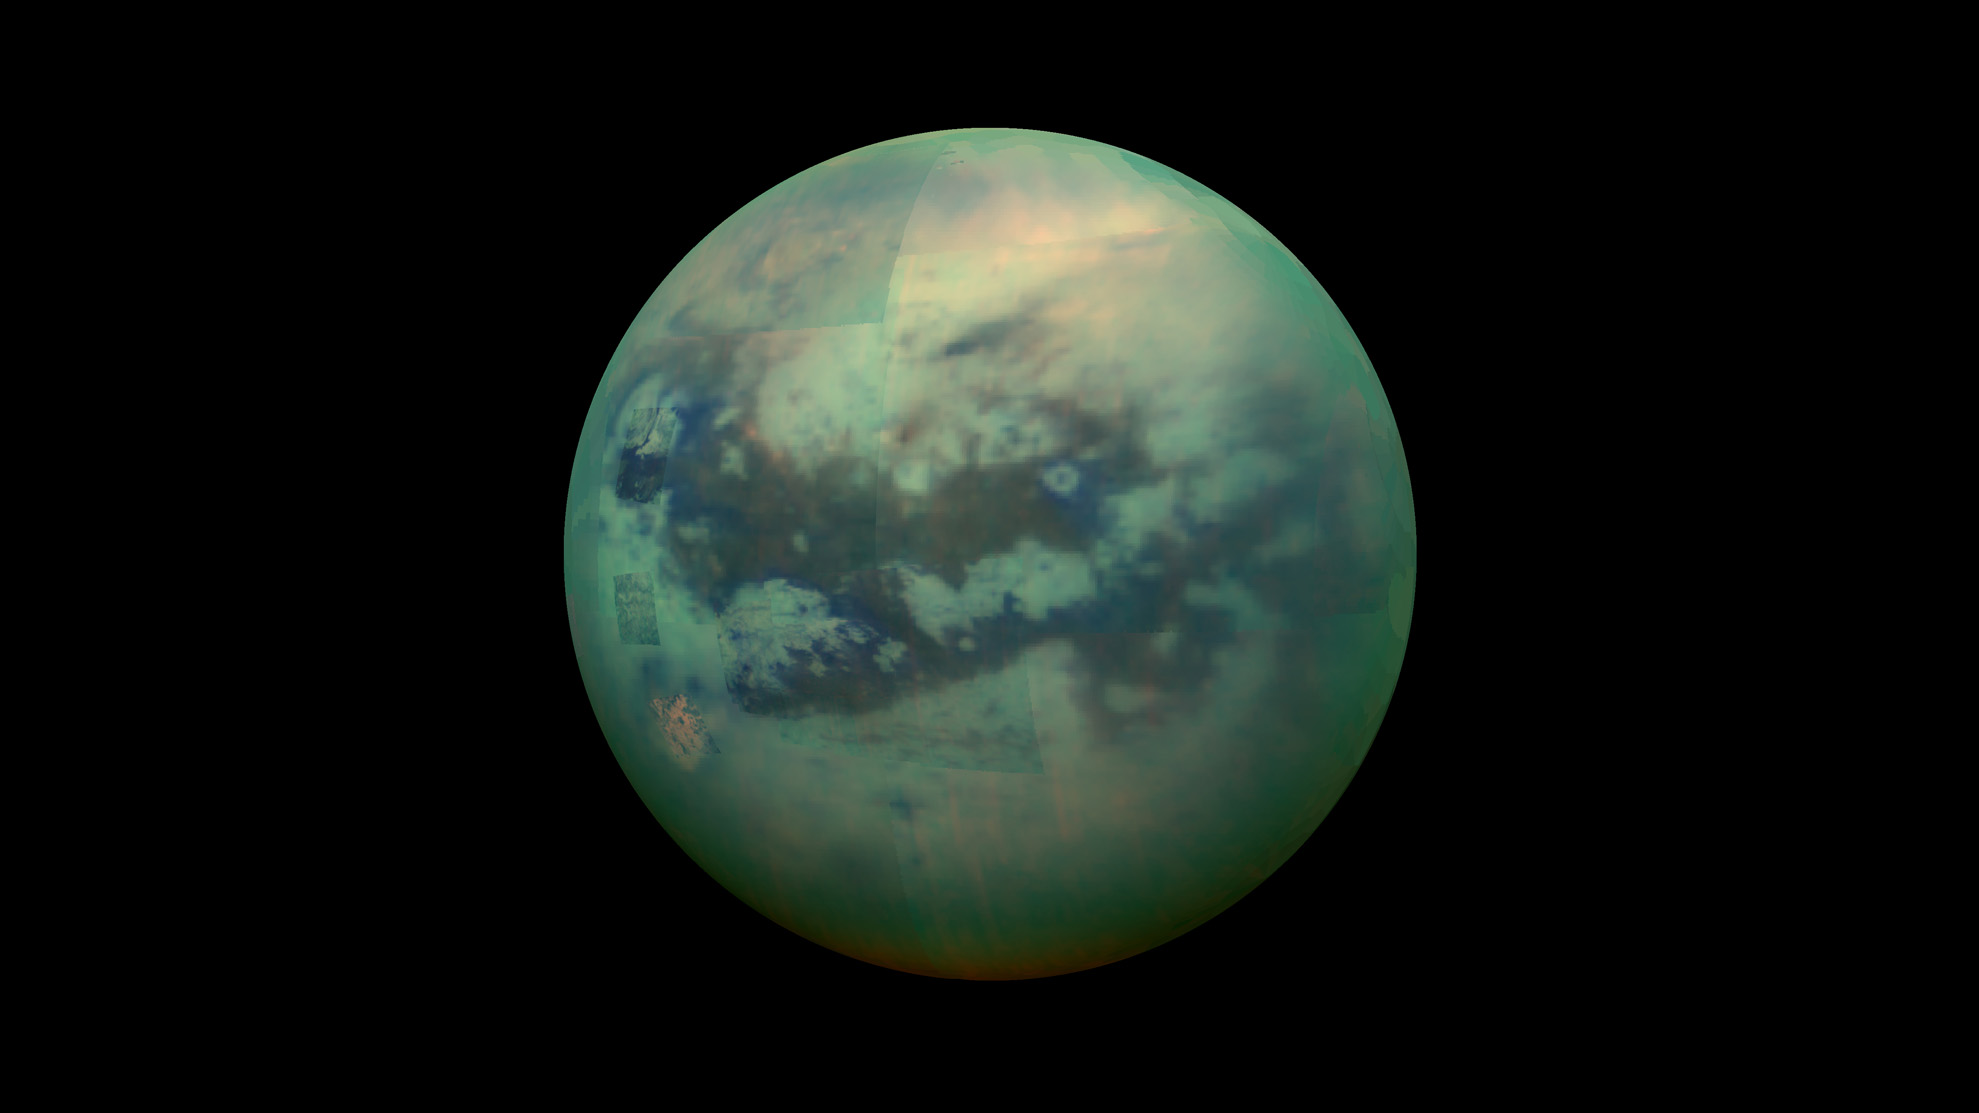 Titan has a liquid cycle, but it's definitely not water